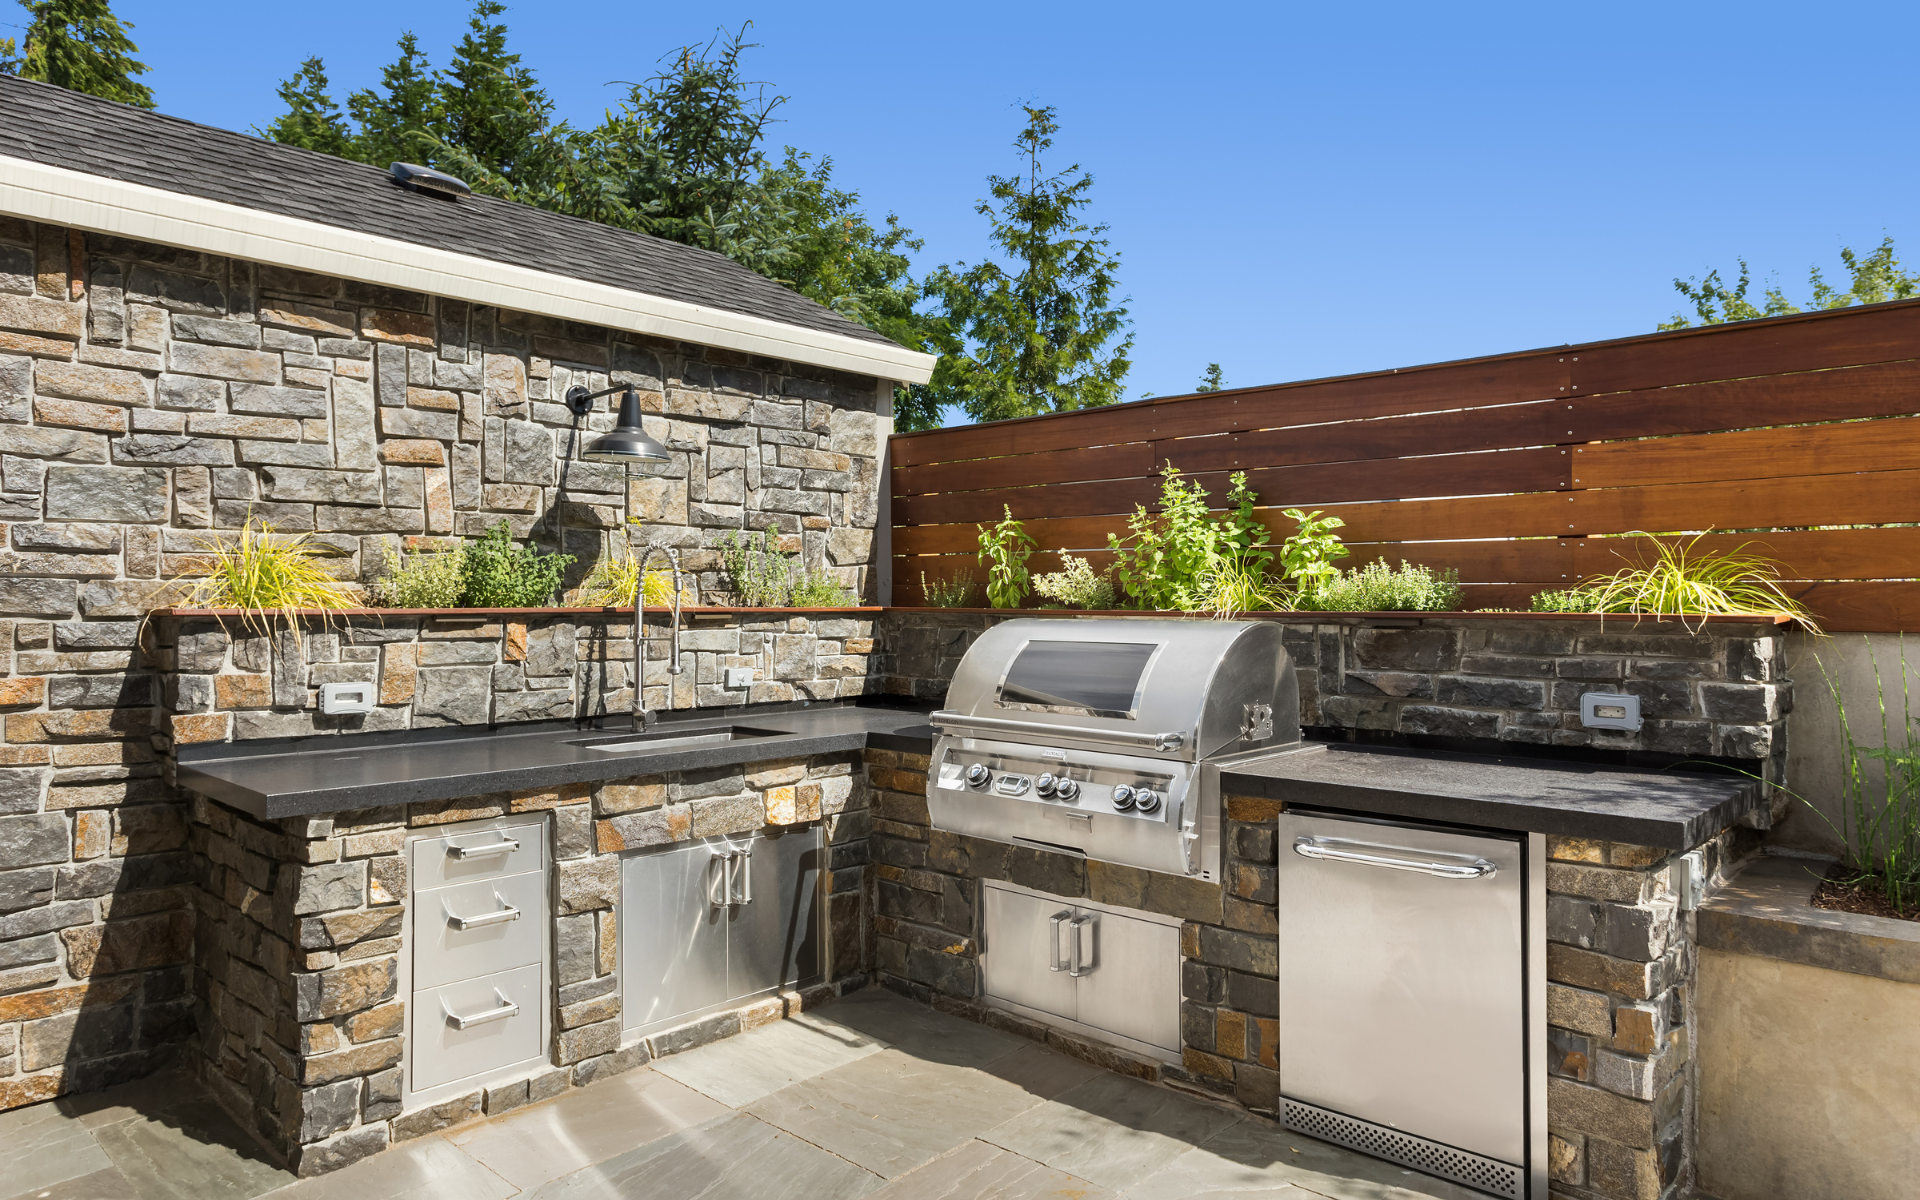 Outdoor kitchen made of bricks, with stainless drawers and cabinets, and dark gray countertop